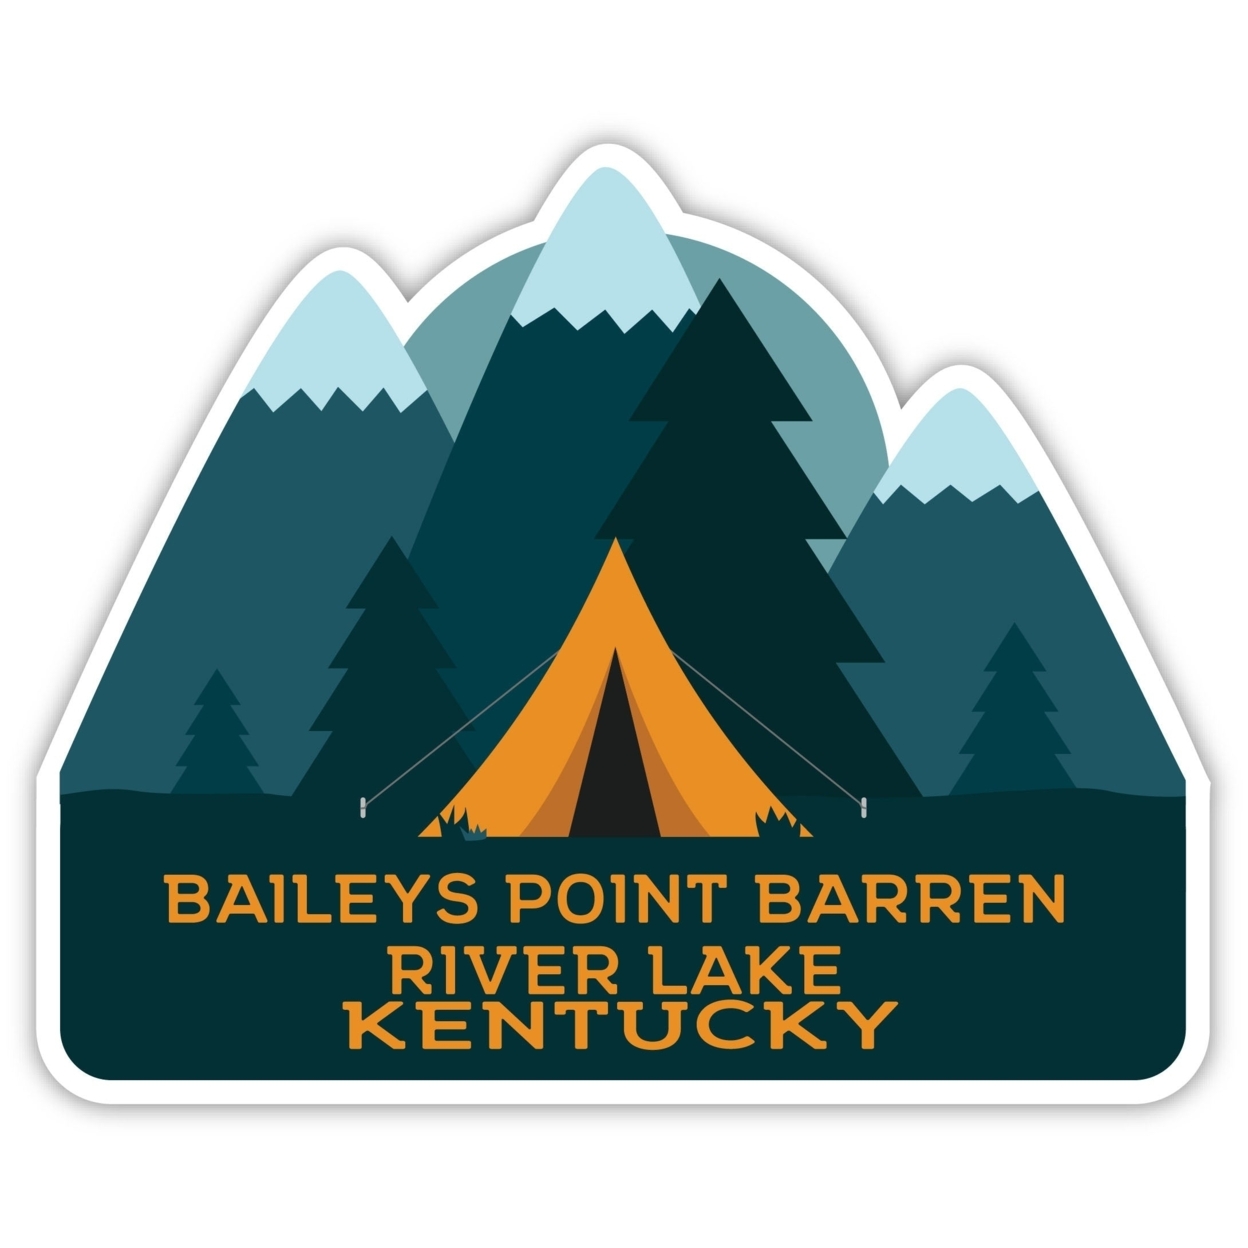 Baileys Point Barren River Lake Kentucky Souvenir Decorative Stickers (Choose Theme And Size) - 4-Pack, 12-Inch, Tent